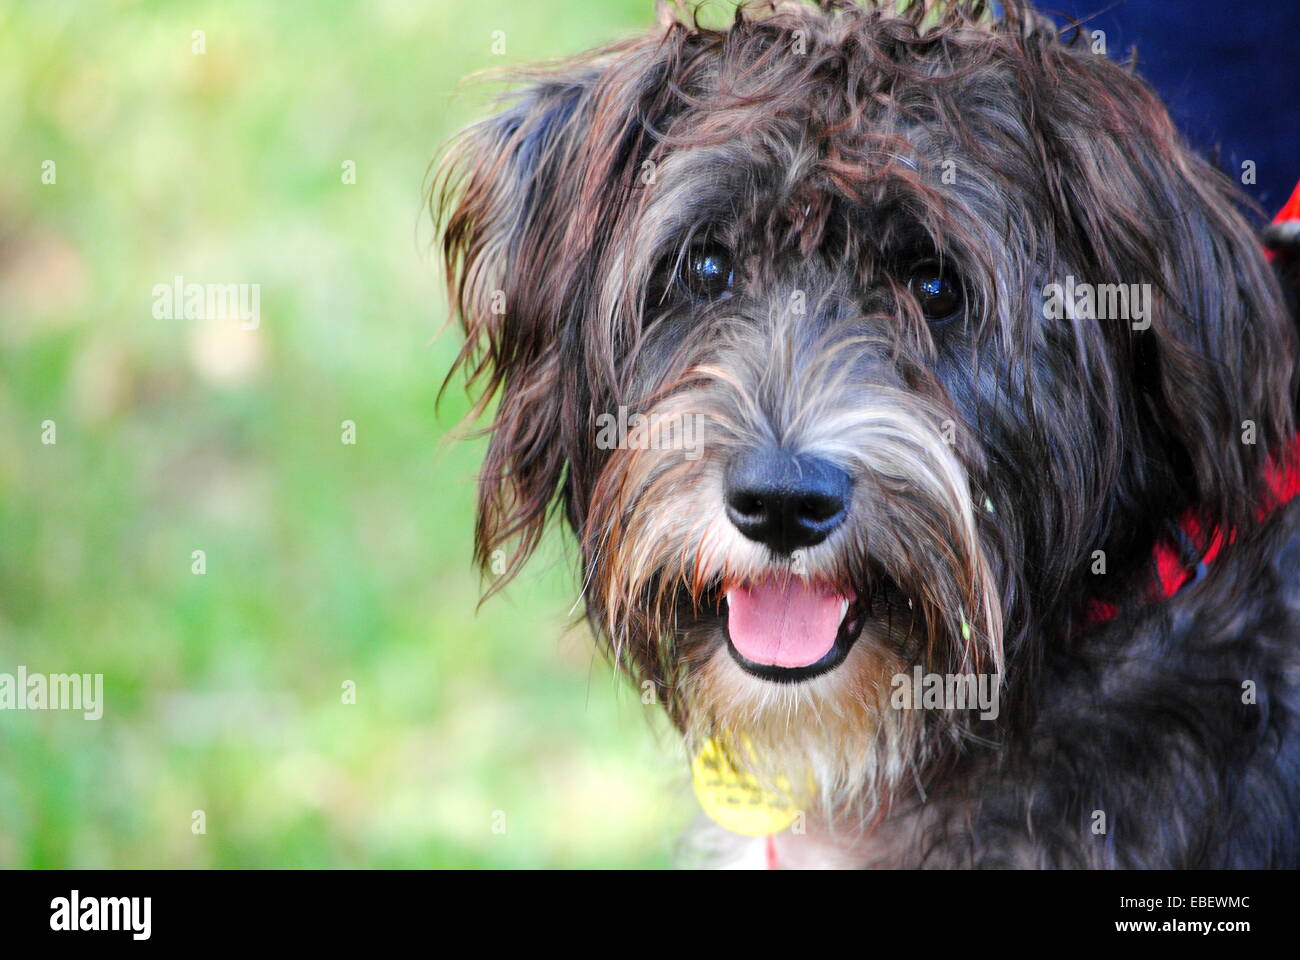 Man's best friend,with a cute face and the perfect tongue.  Soloman, king of the castle. Stock Photo